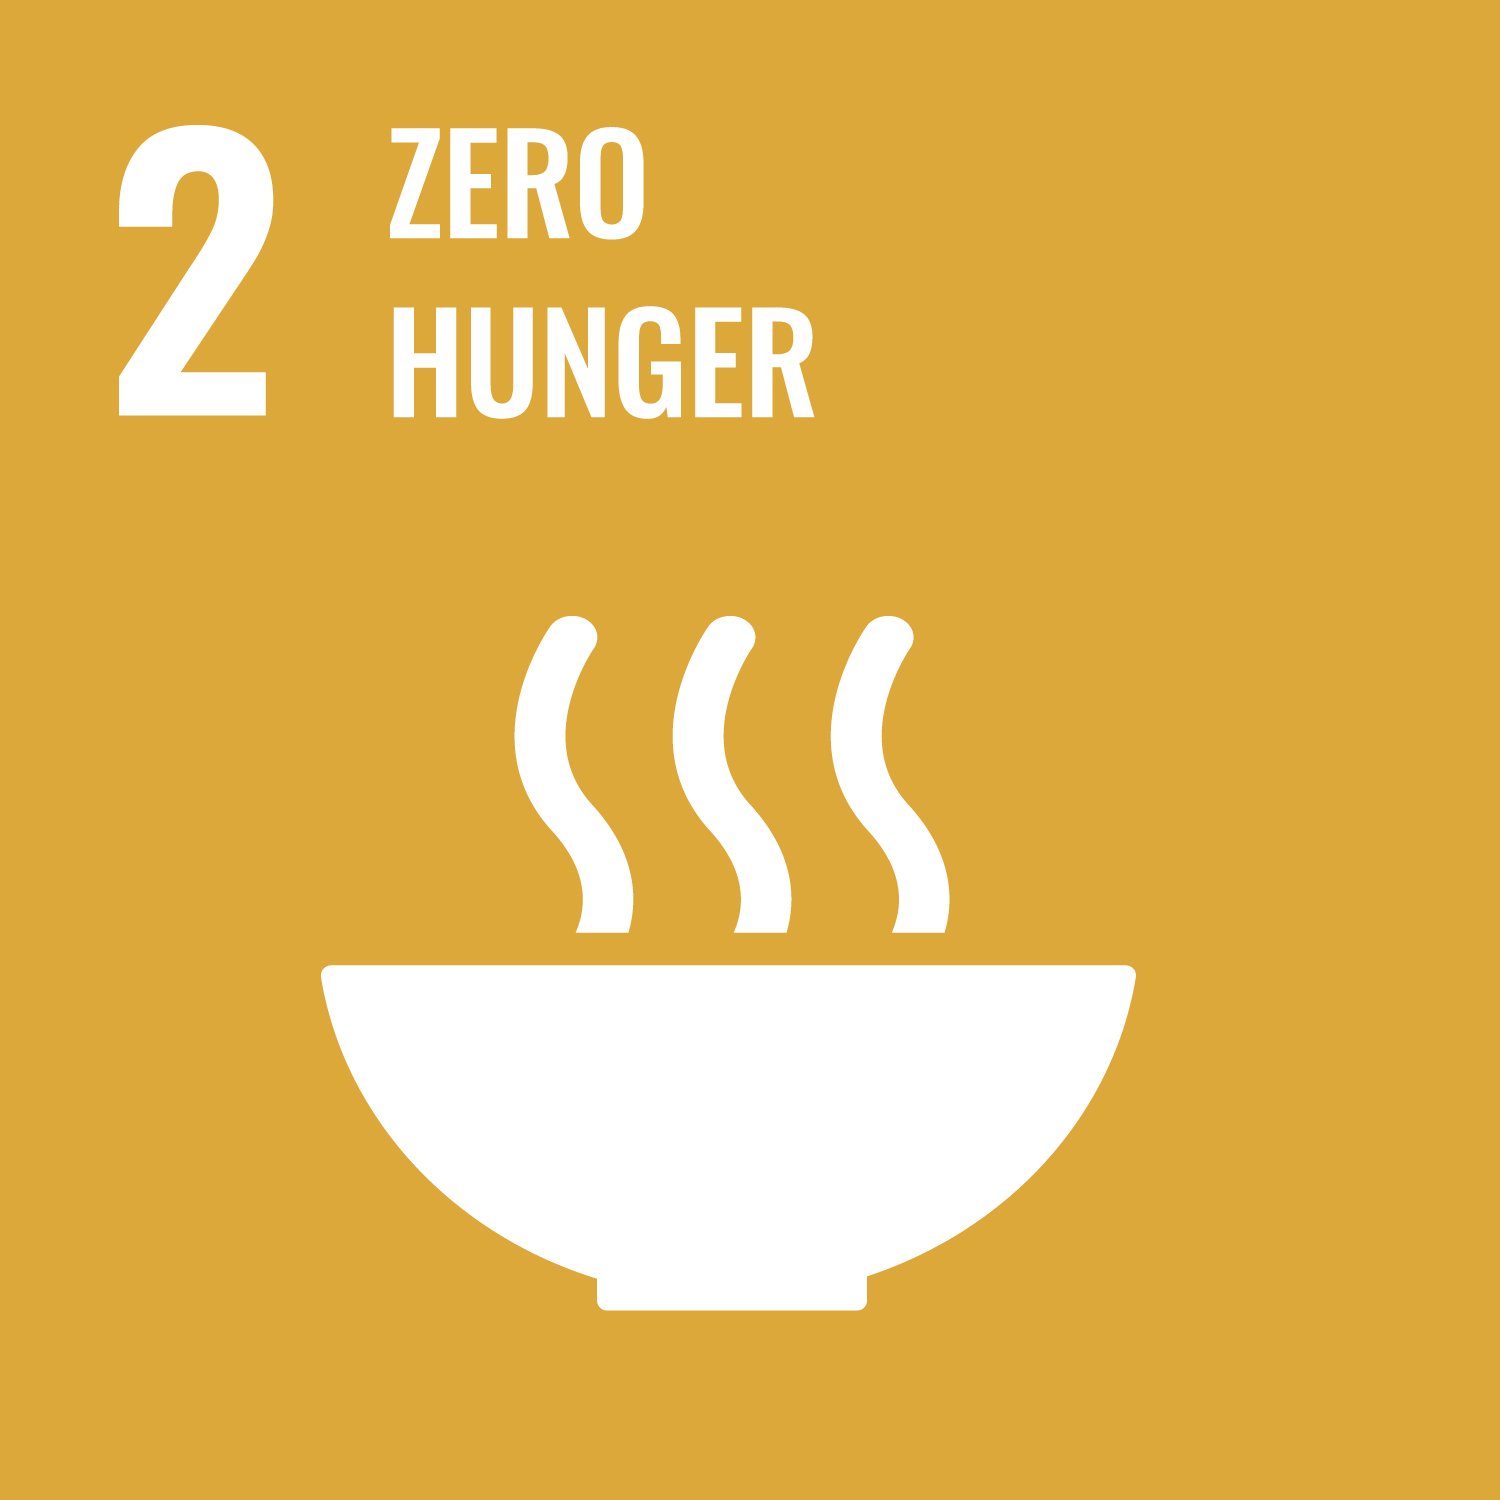 SGD 2 - End hunger, achieve food security and improved nutrition and promote sustainable agriculture